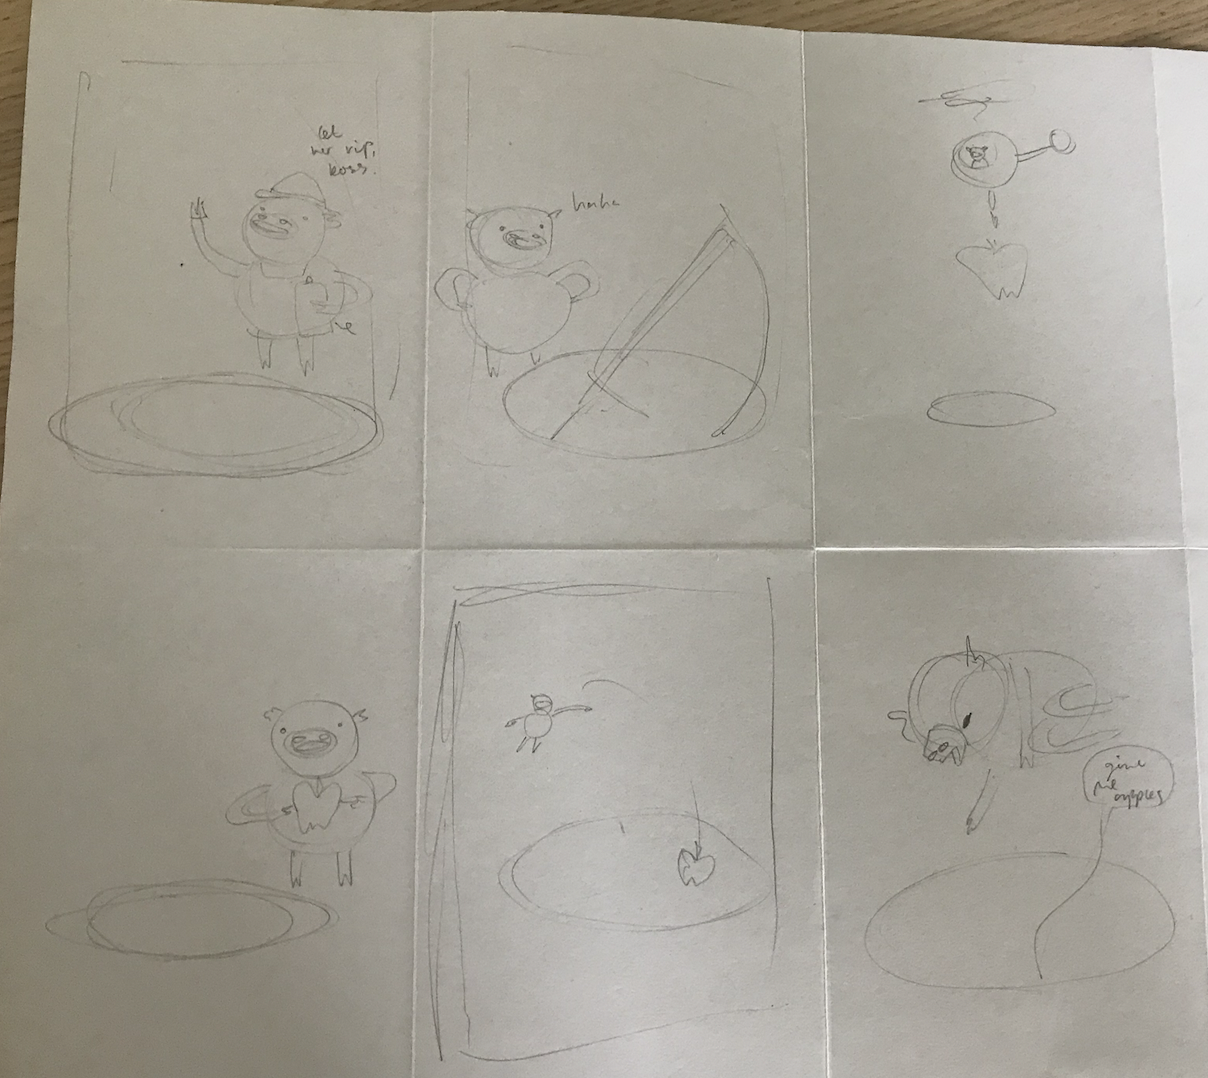 sketchy drawings of a pig throwing apples in a hole